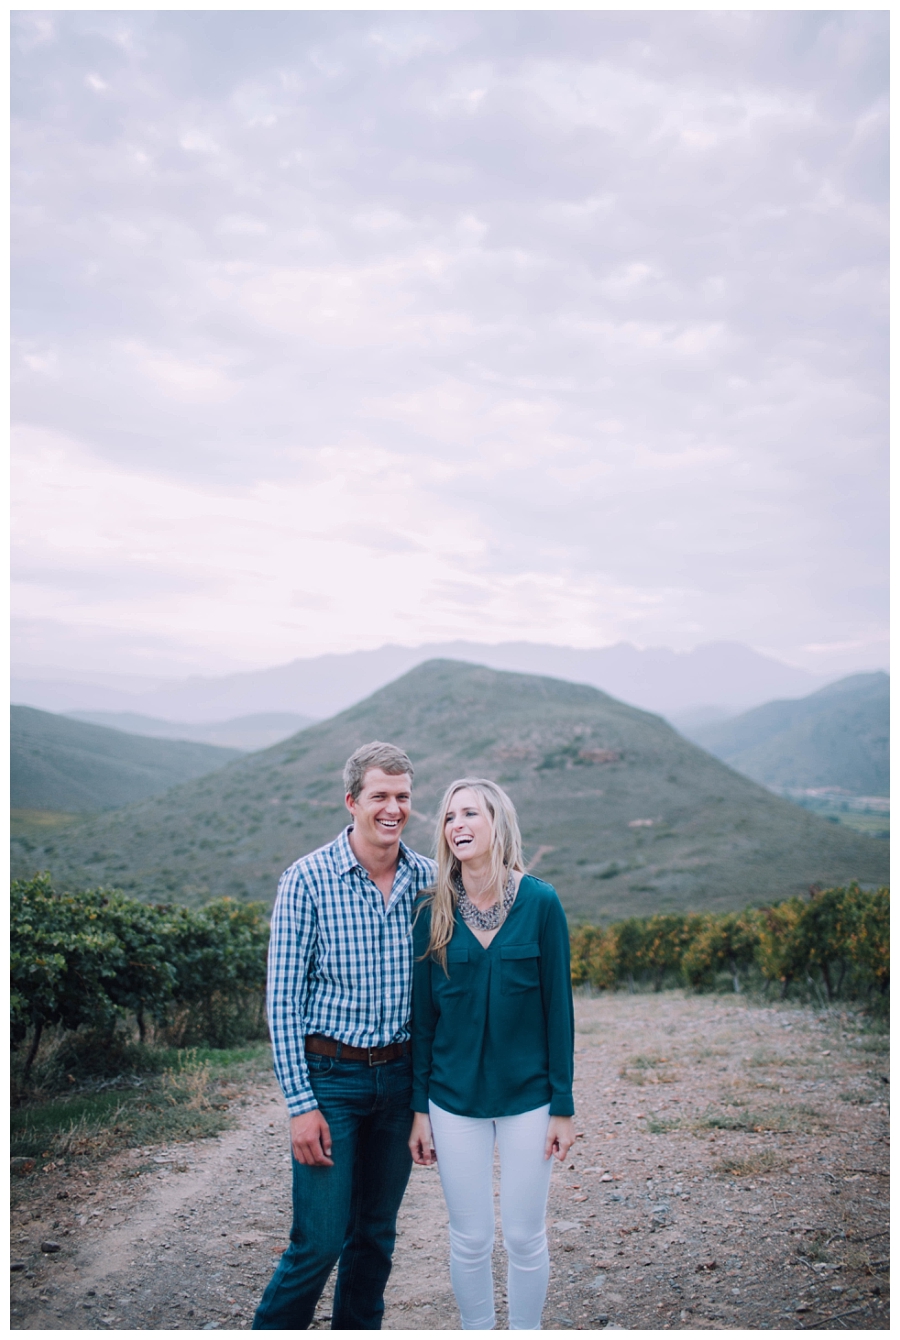 Ronel Kruger Cape Town Wedding and Lifestyle Photographer_4047.jpg